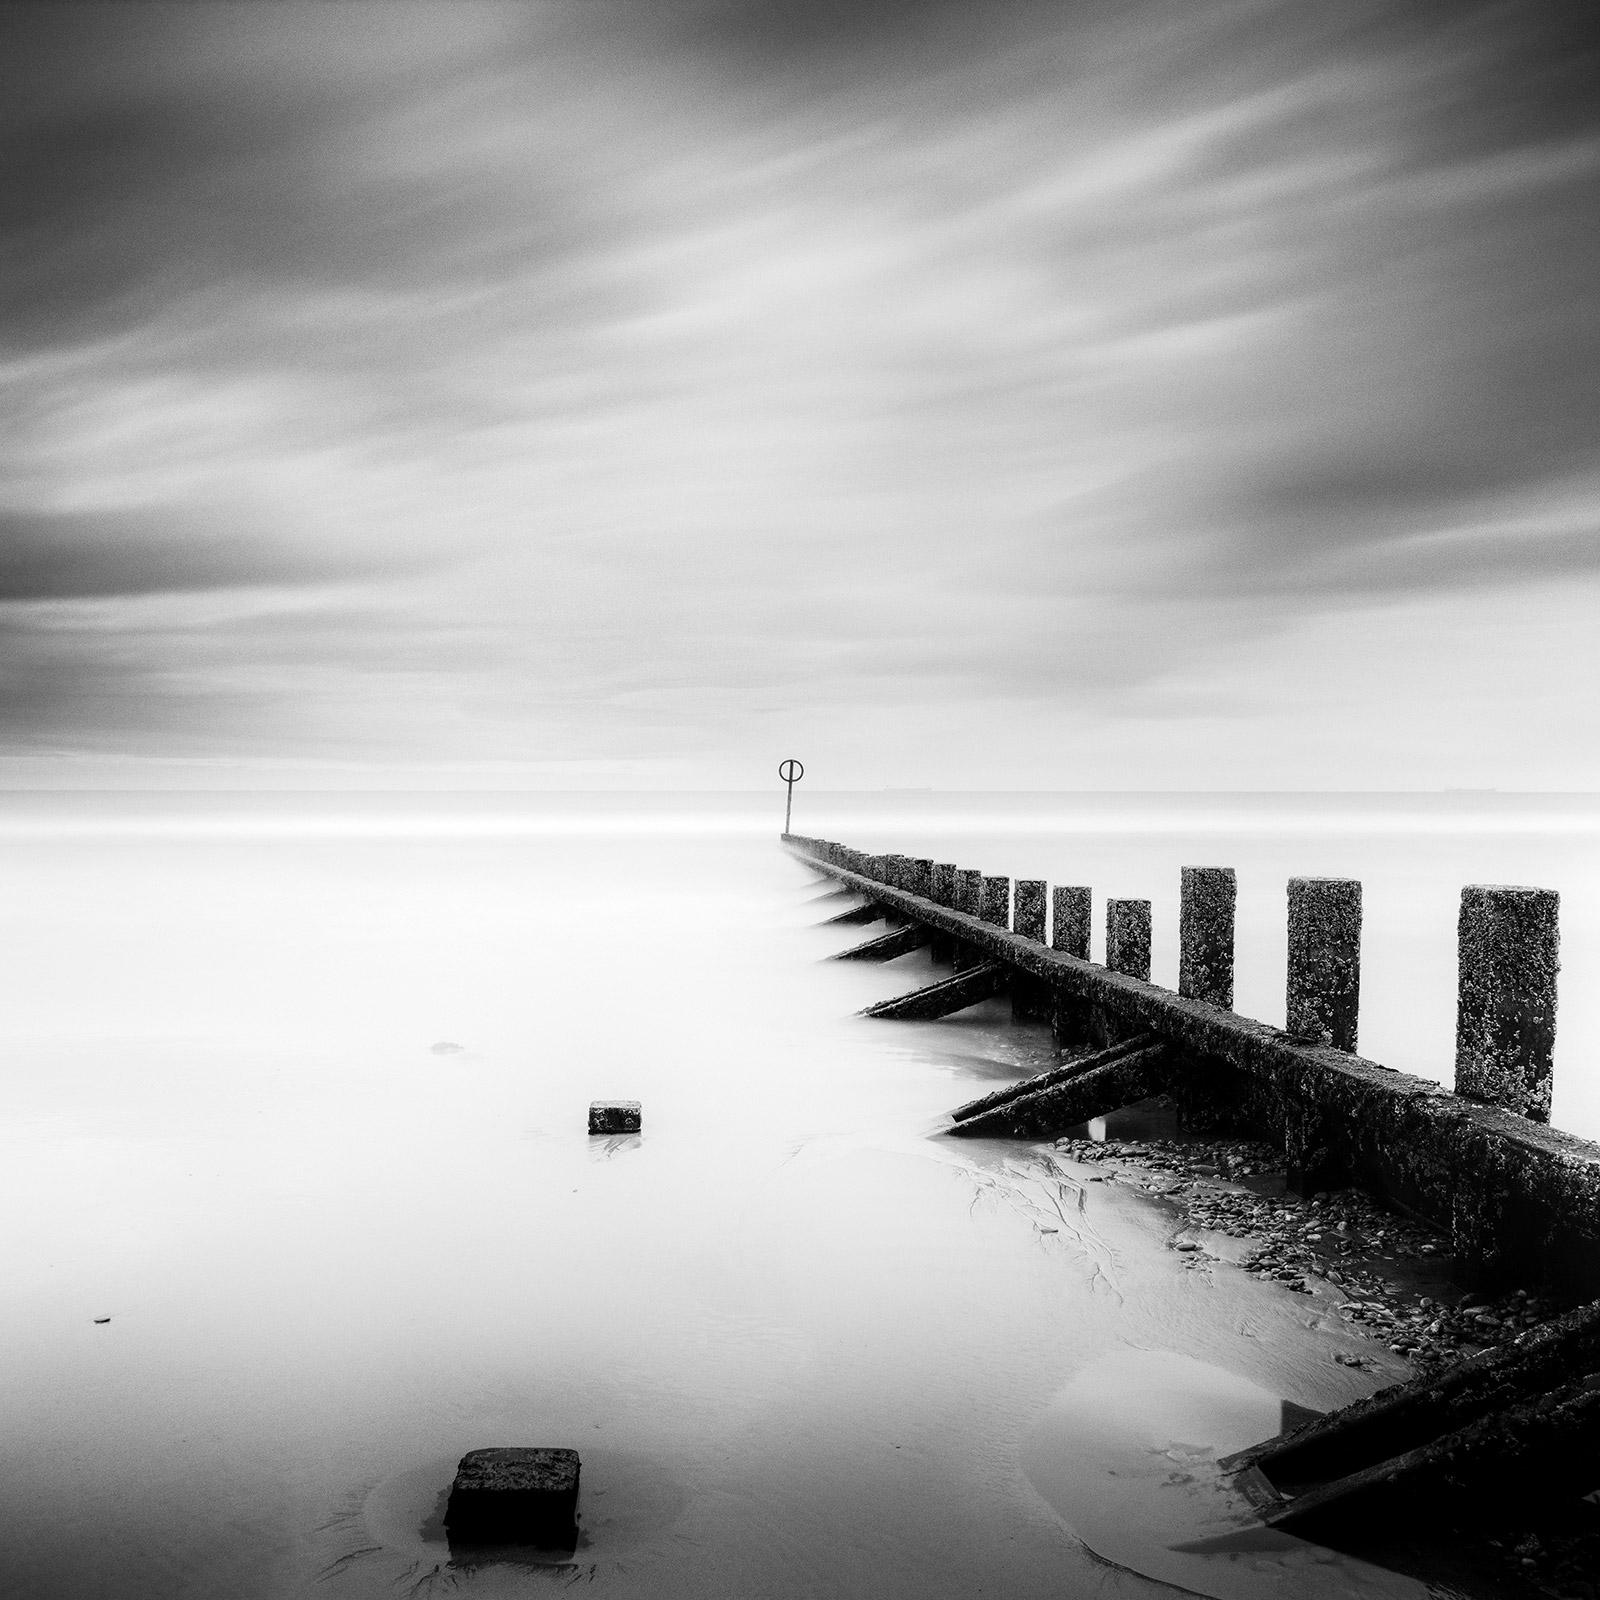 Gerald Berghammer Black and White Photograph - Pointing the Way, Wavebreaker, Scotland, black and white photography, landscape